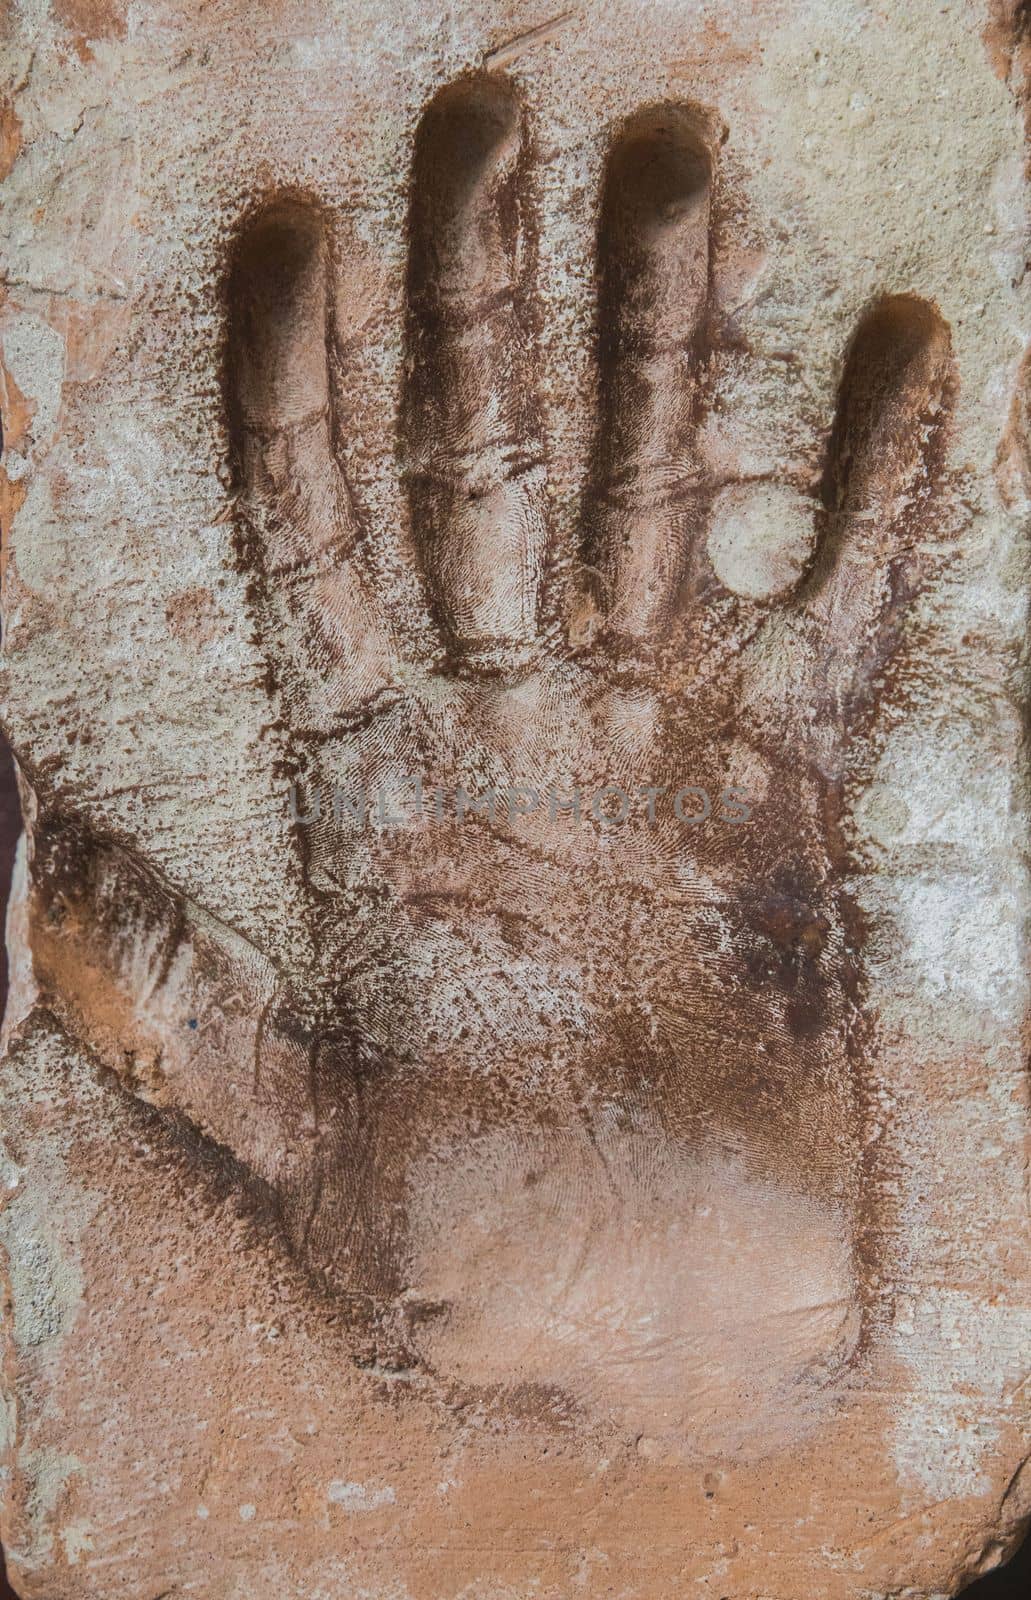 Old dirty concrete background with male handprint.